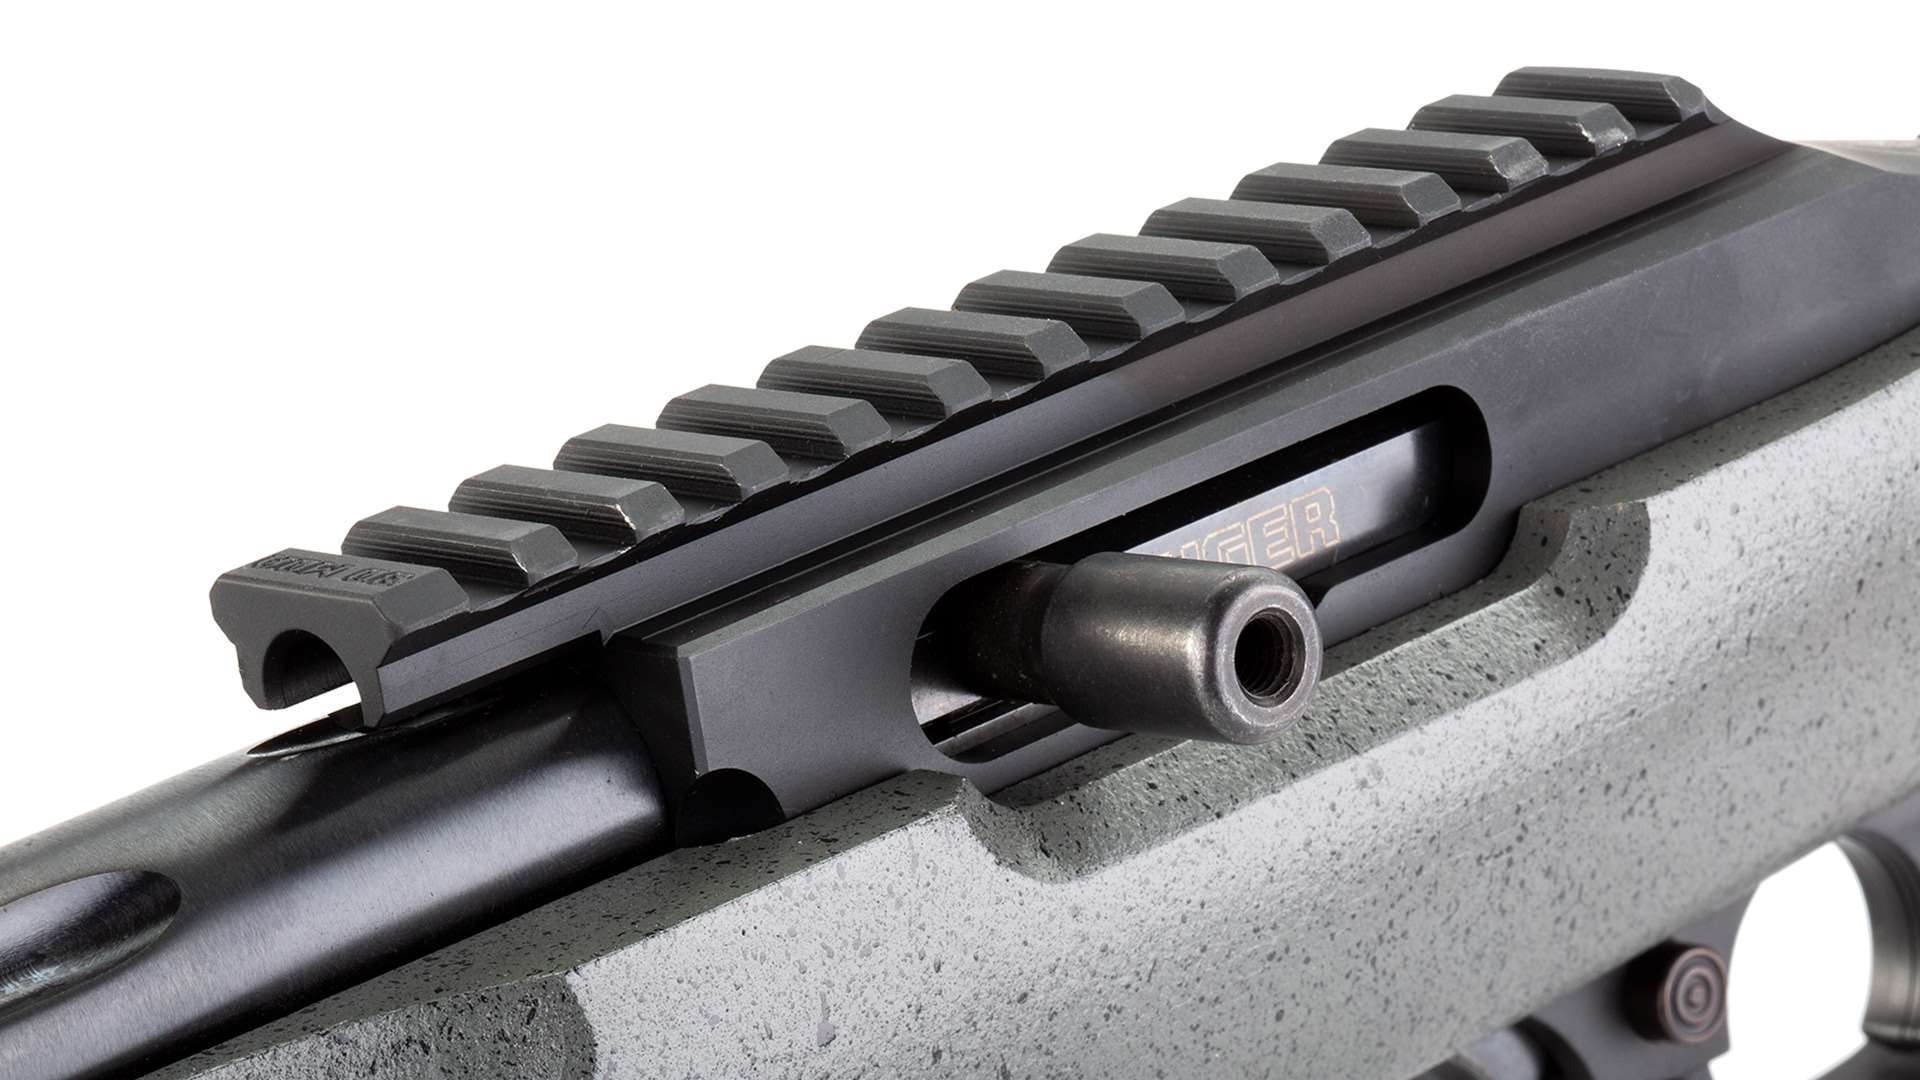 Picatinny rail and bolt release